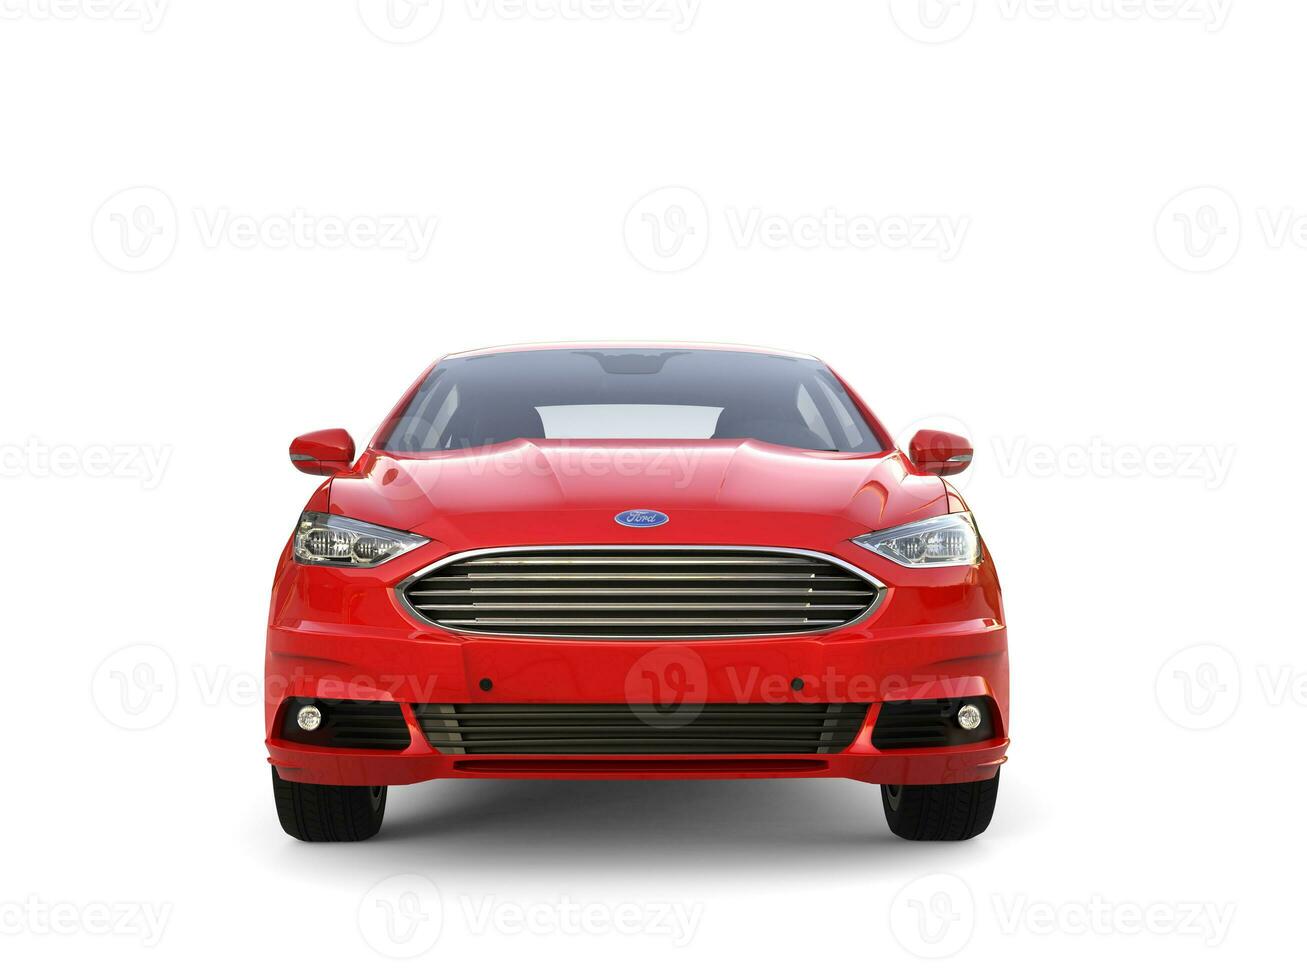 Fire red Ford Mondeo 2015 - 2018 model - front view - 3D Illustration - on white background photo